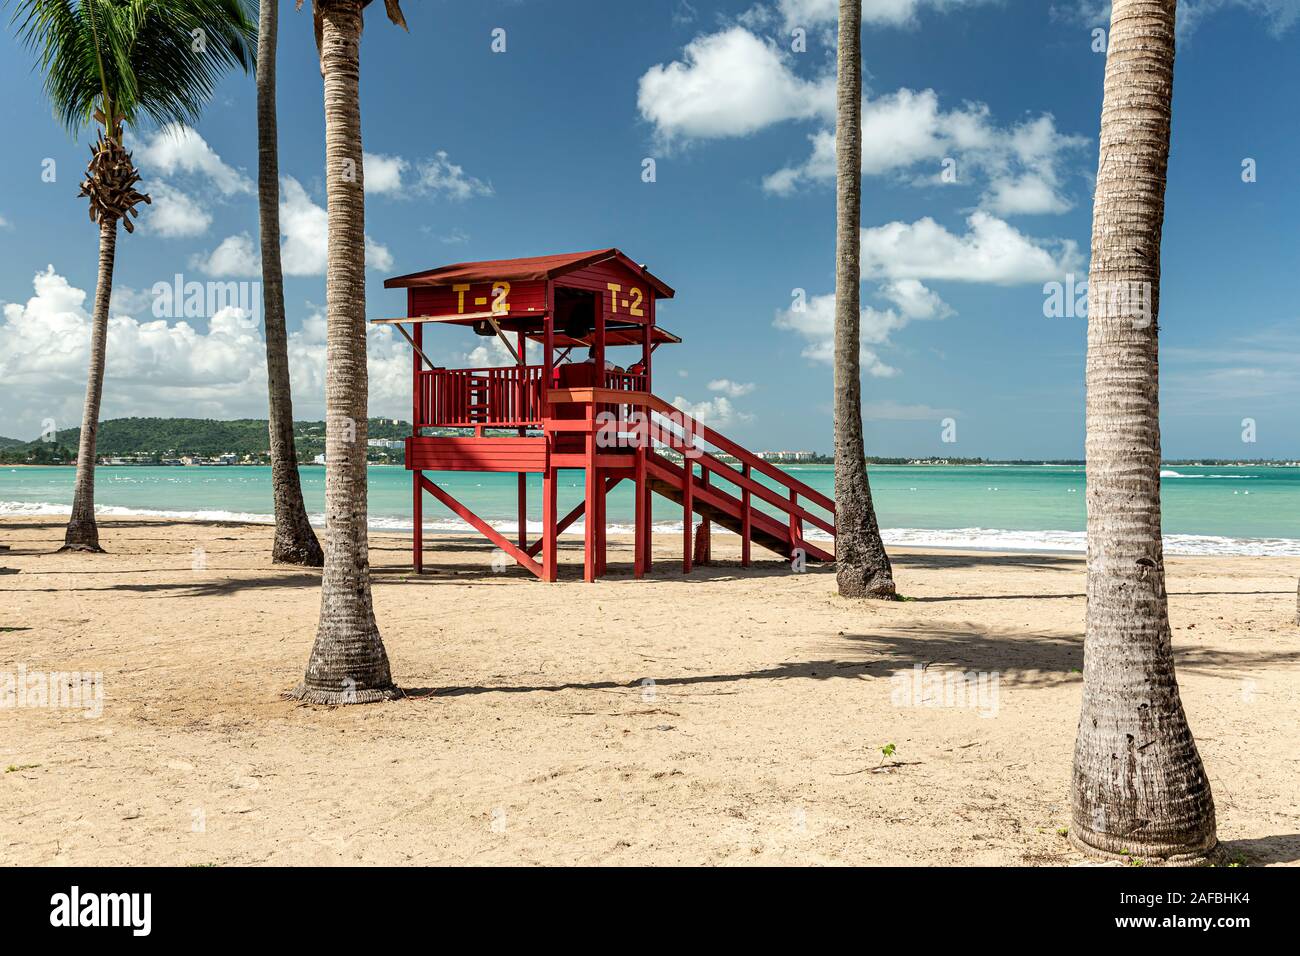 Lifeguard house and palm trees, Luquillo Beach, Luquillo, Puerto Rico Stock Photo